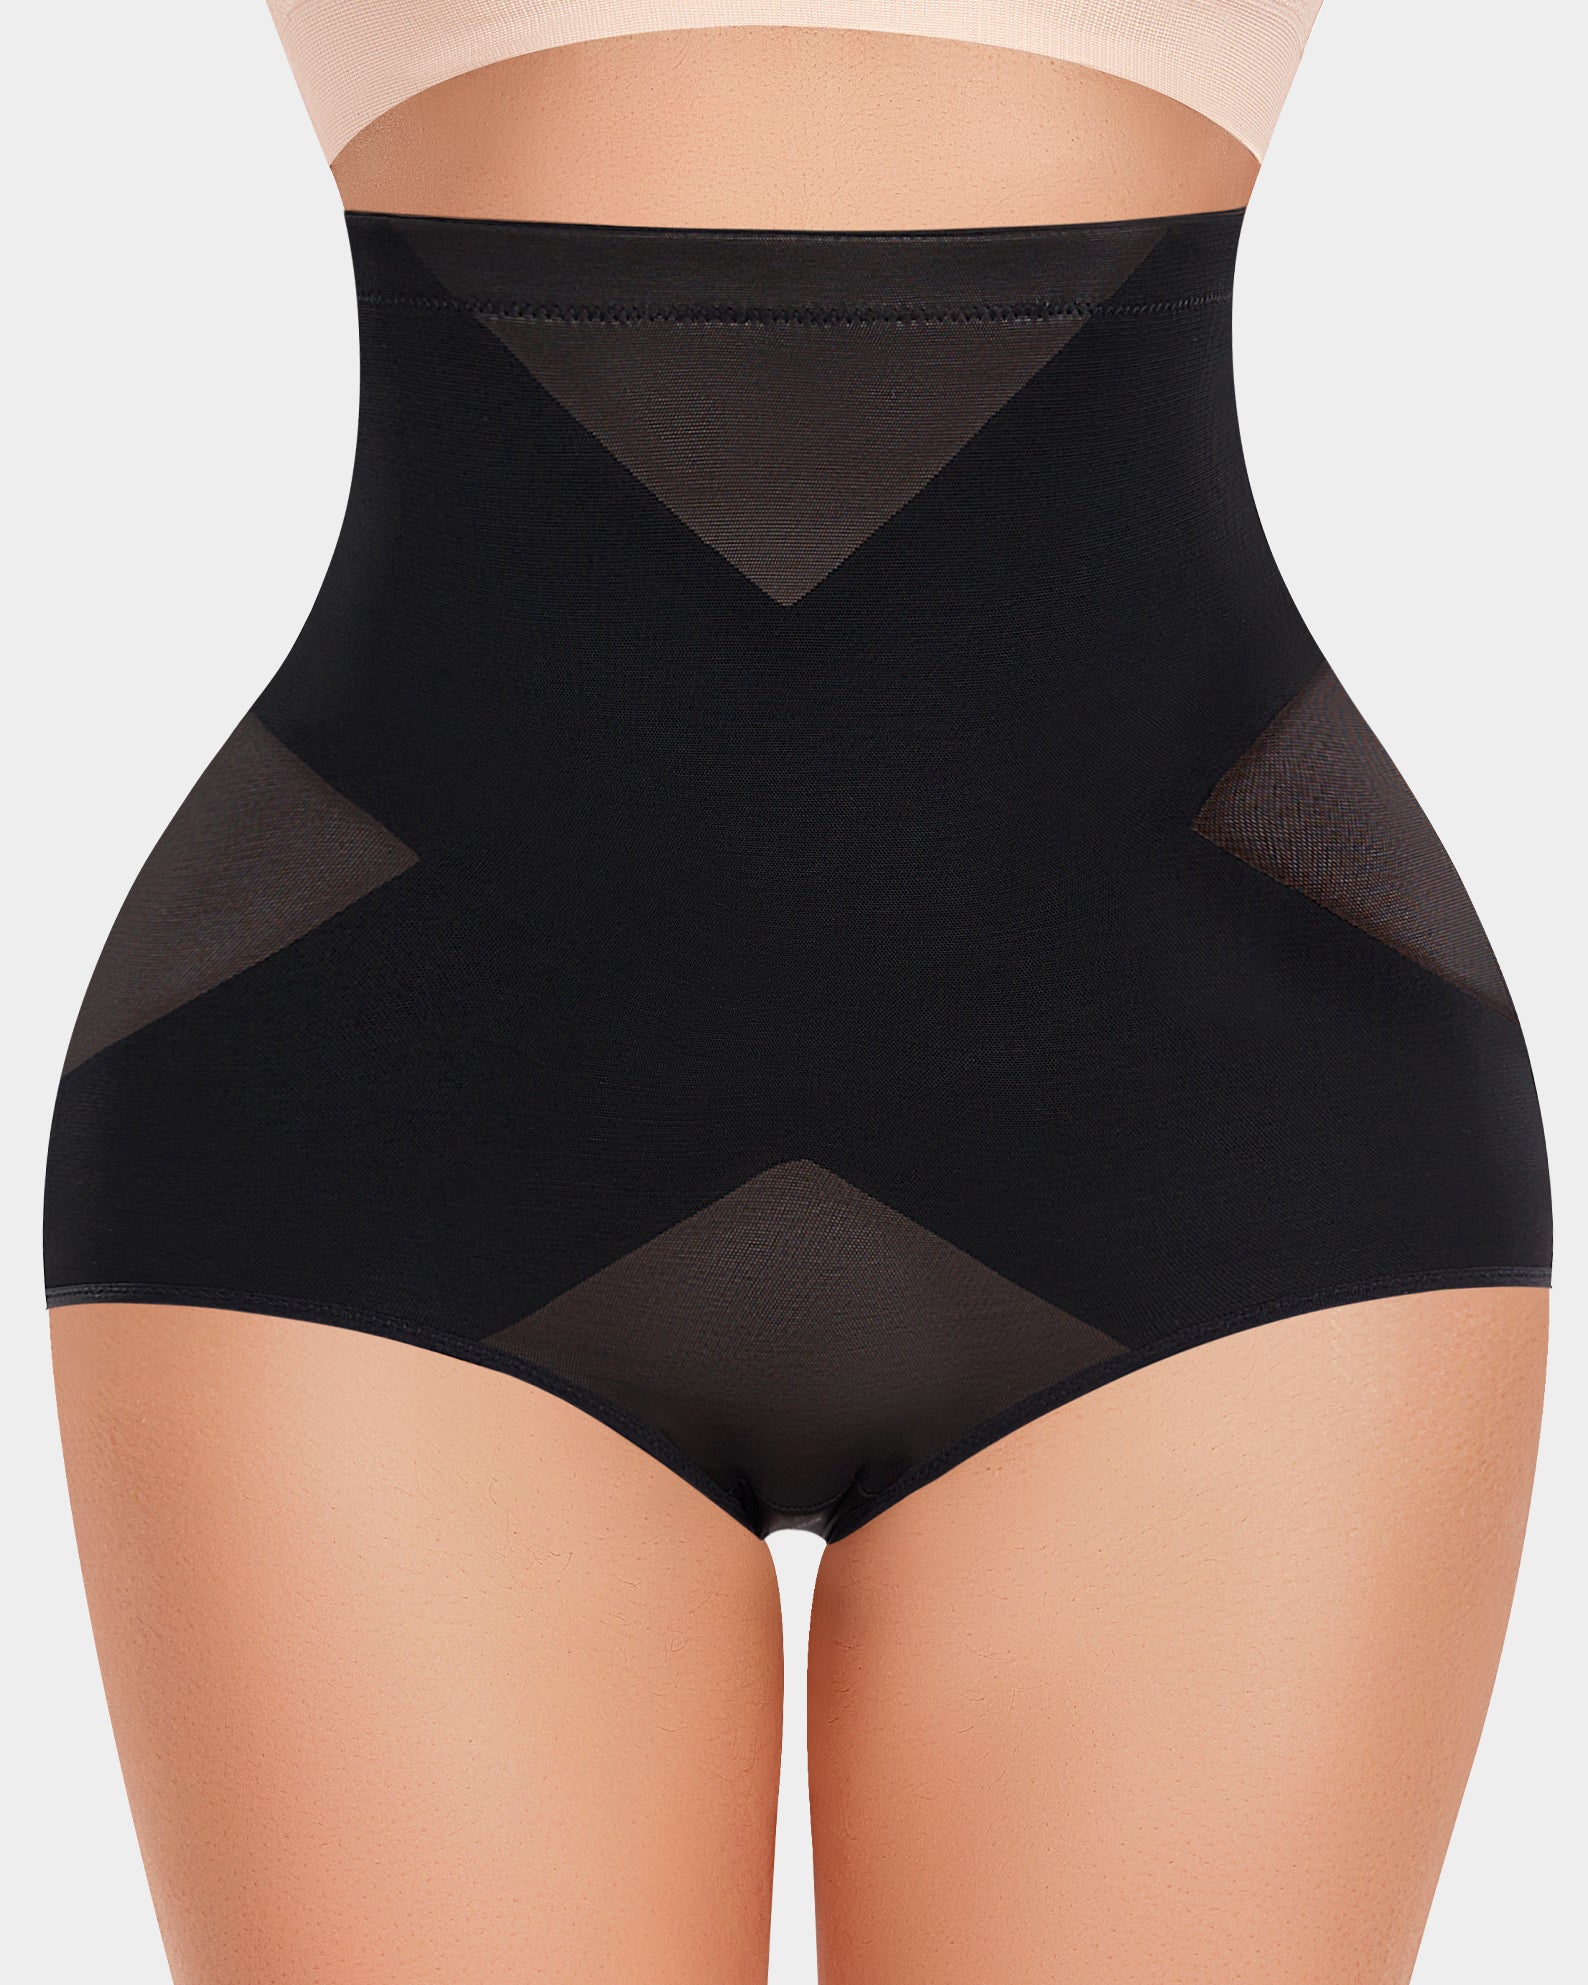 Naturana Firm Control Panty Girdle – Dervans Fashions